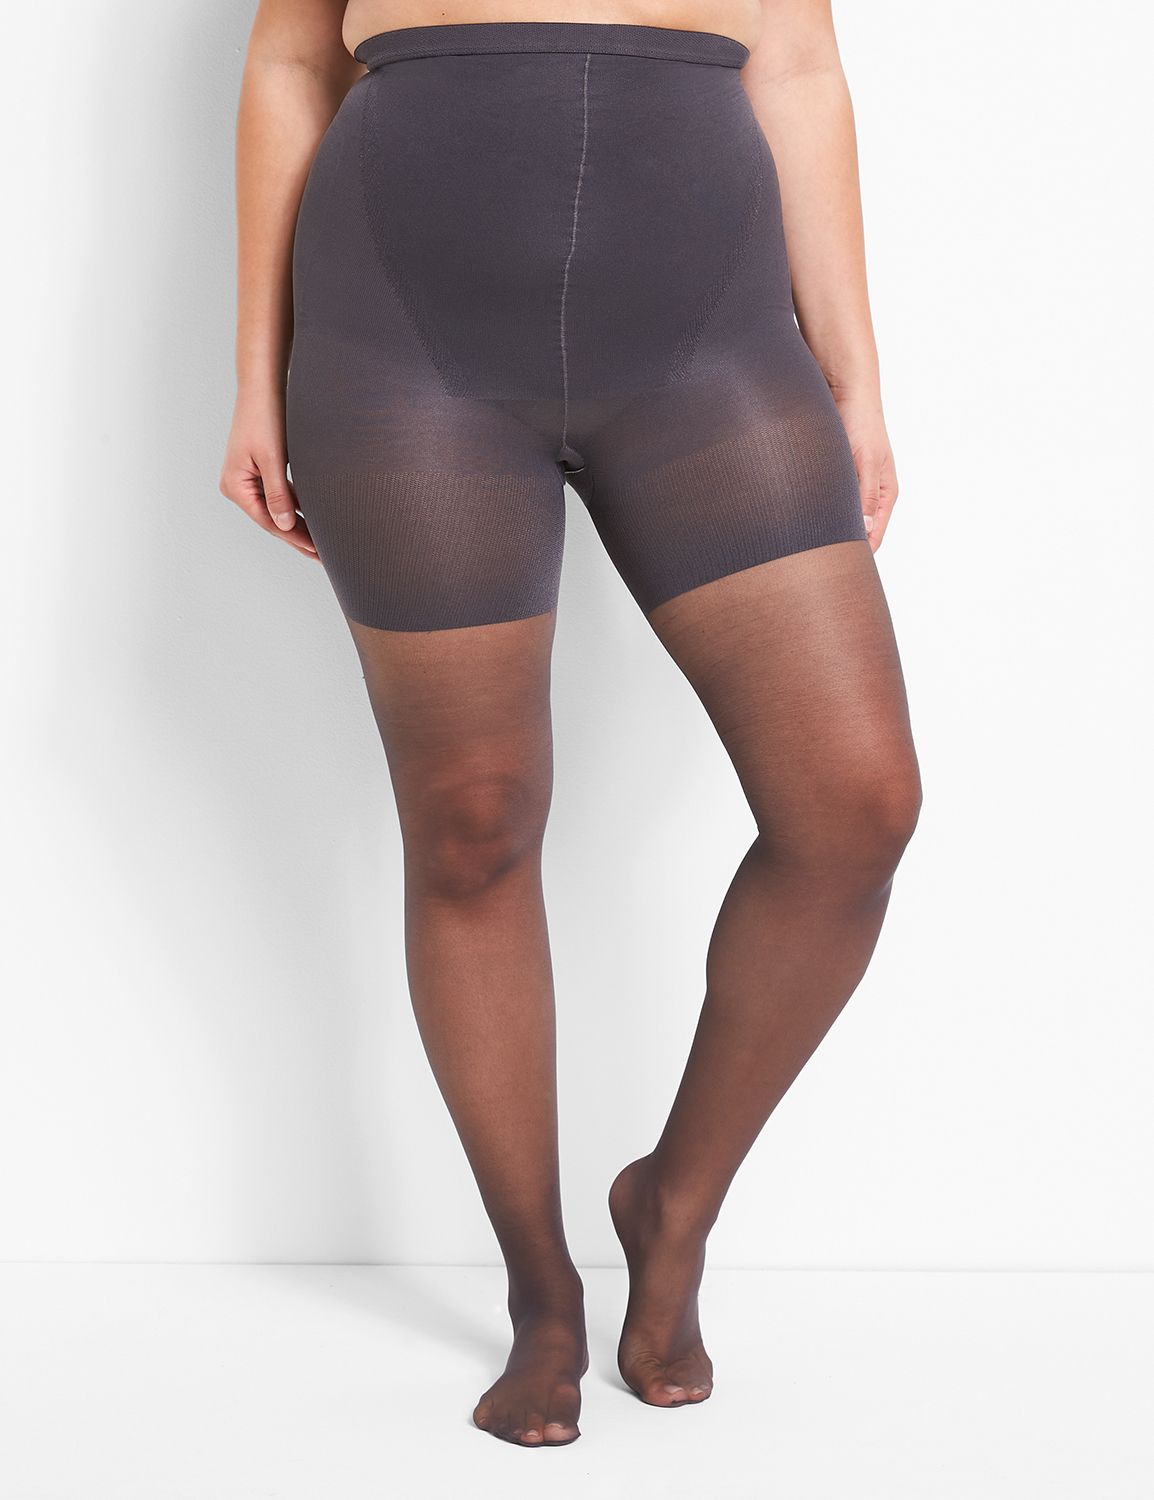 Couture Perfectly Sheer Summer Tights at The Hosiery Box Everyday Tights